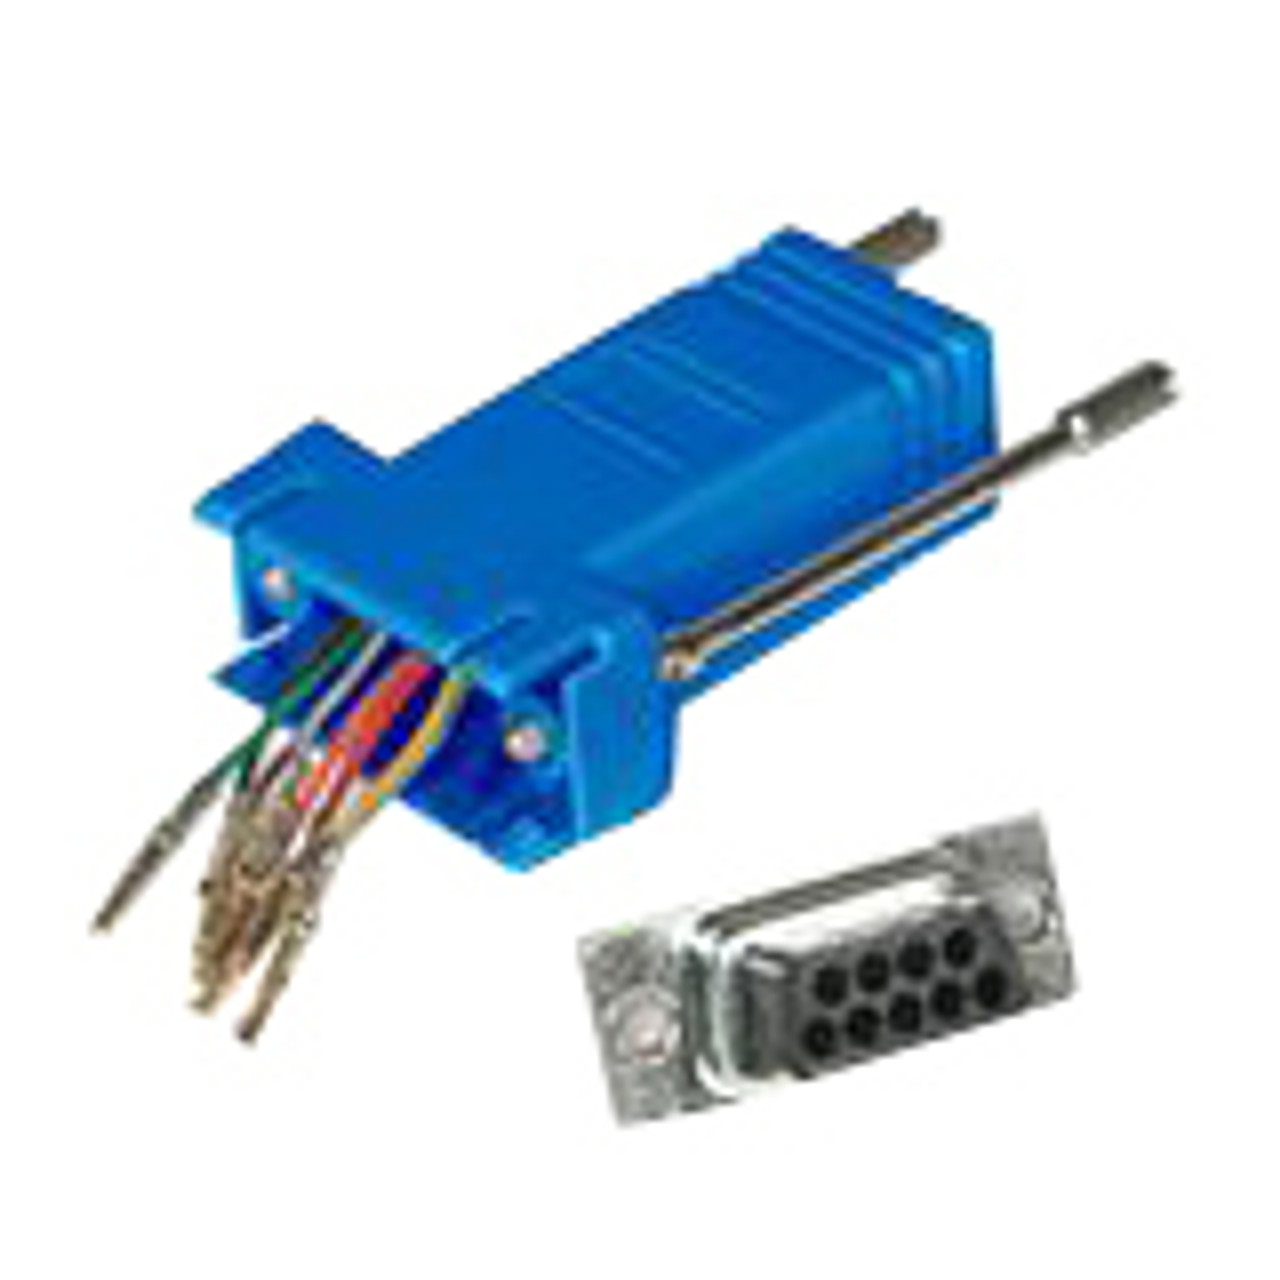 81545 Cables To Go RJ45/DB9F Modular Adapter